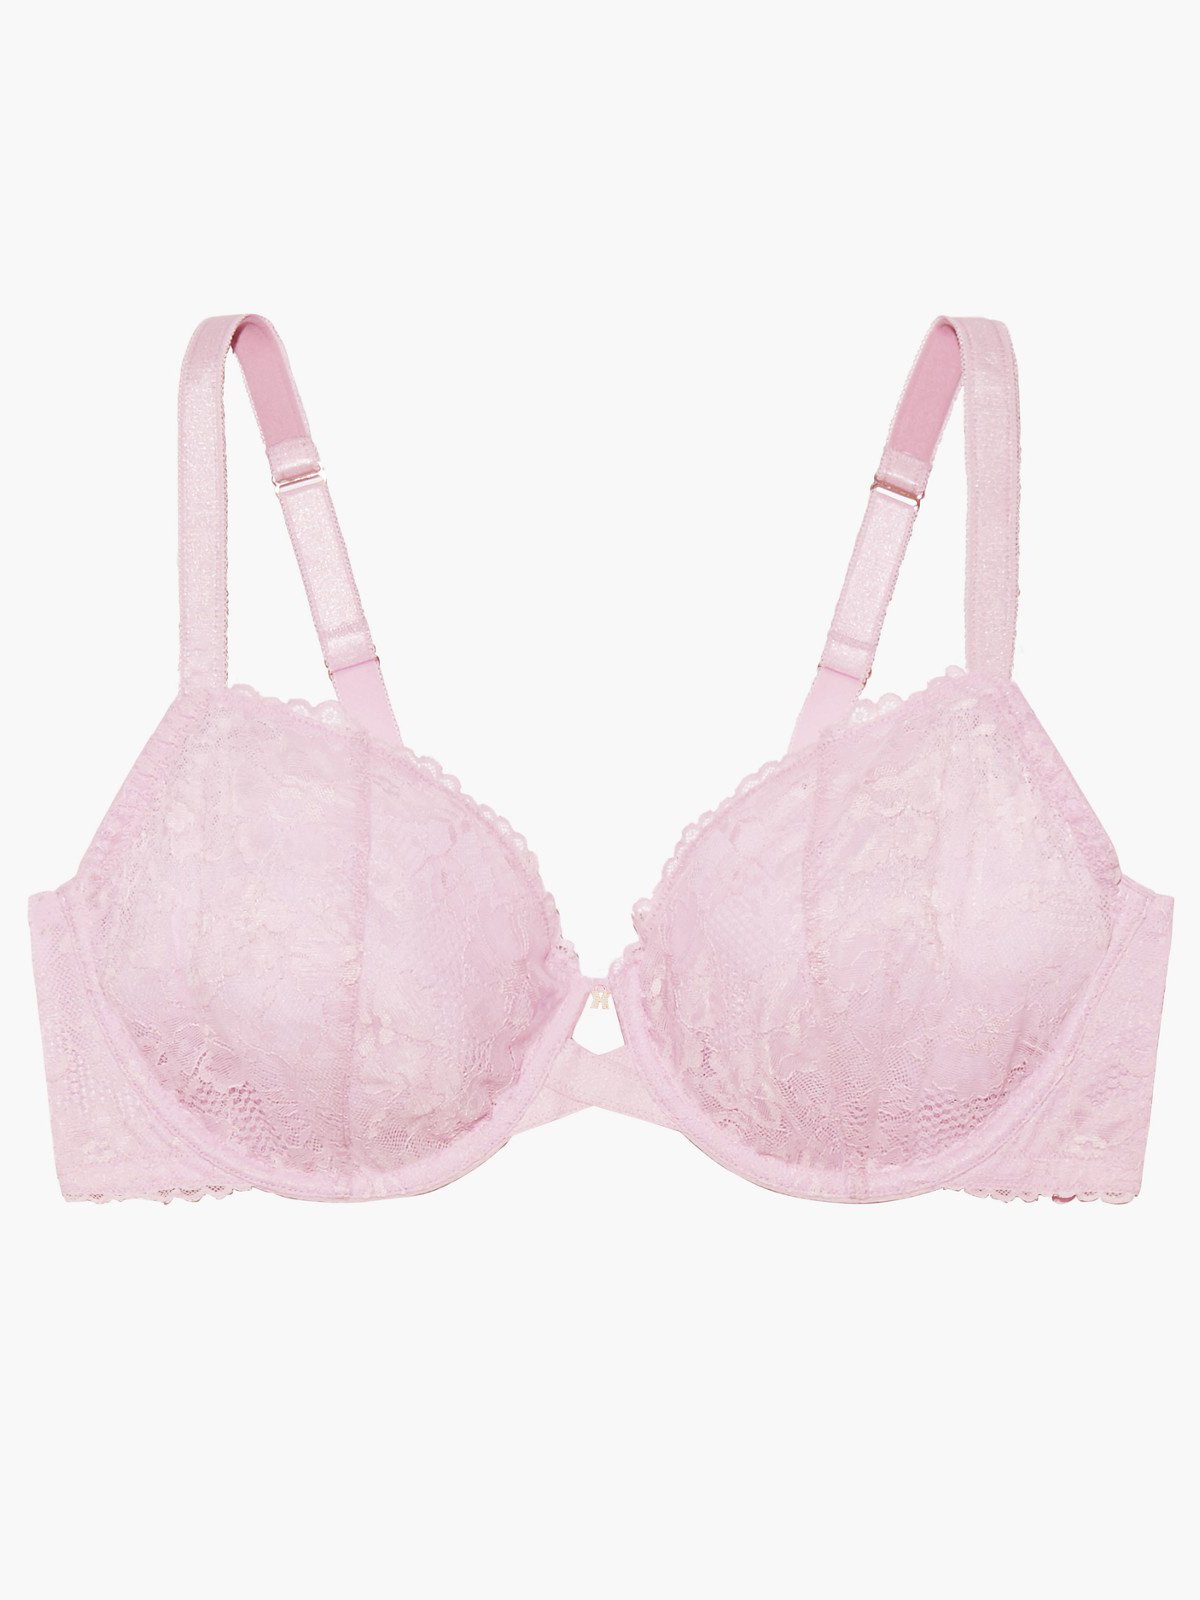 Savage x Fenty Pink Unlined Sheer Scallop Lace Underwire Bra Size 40D